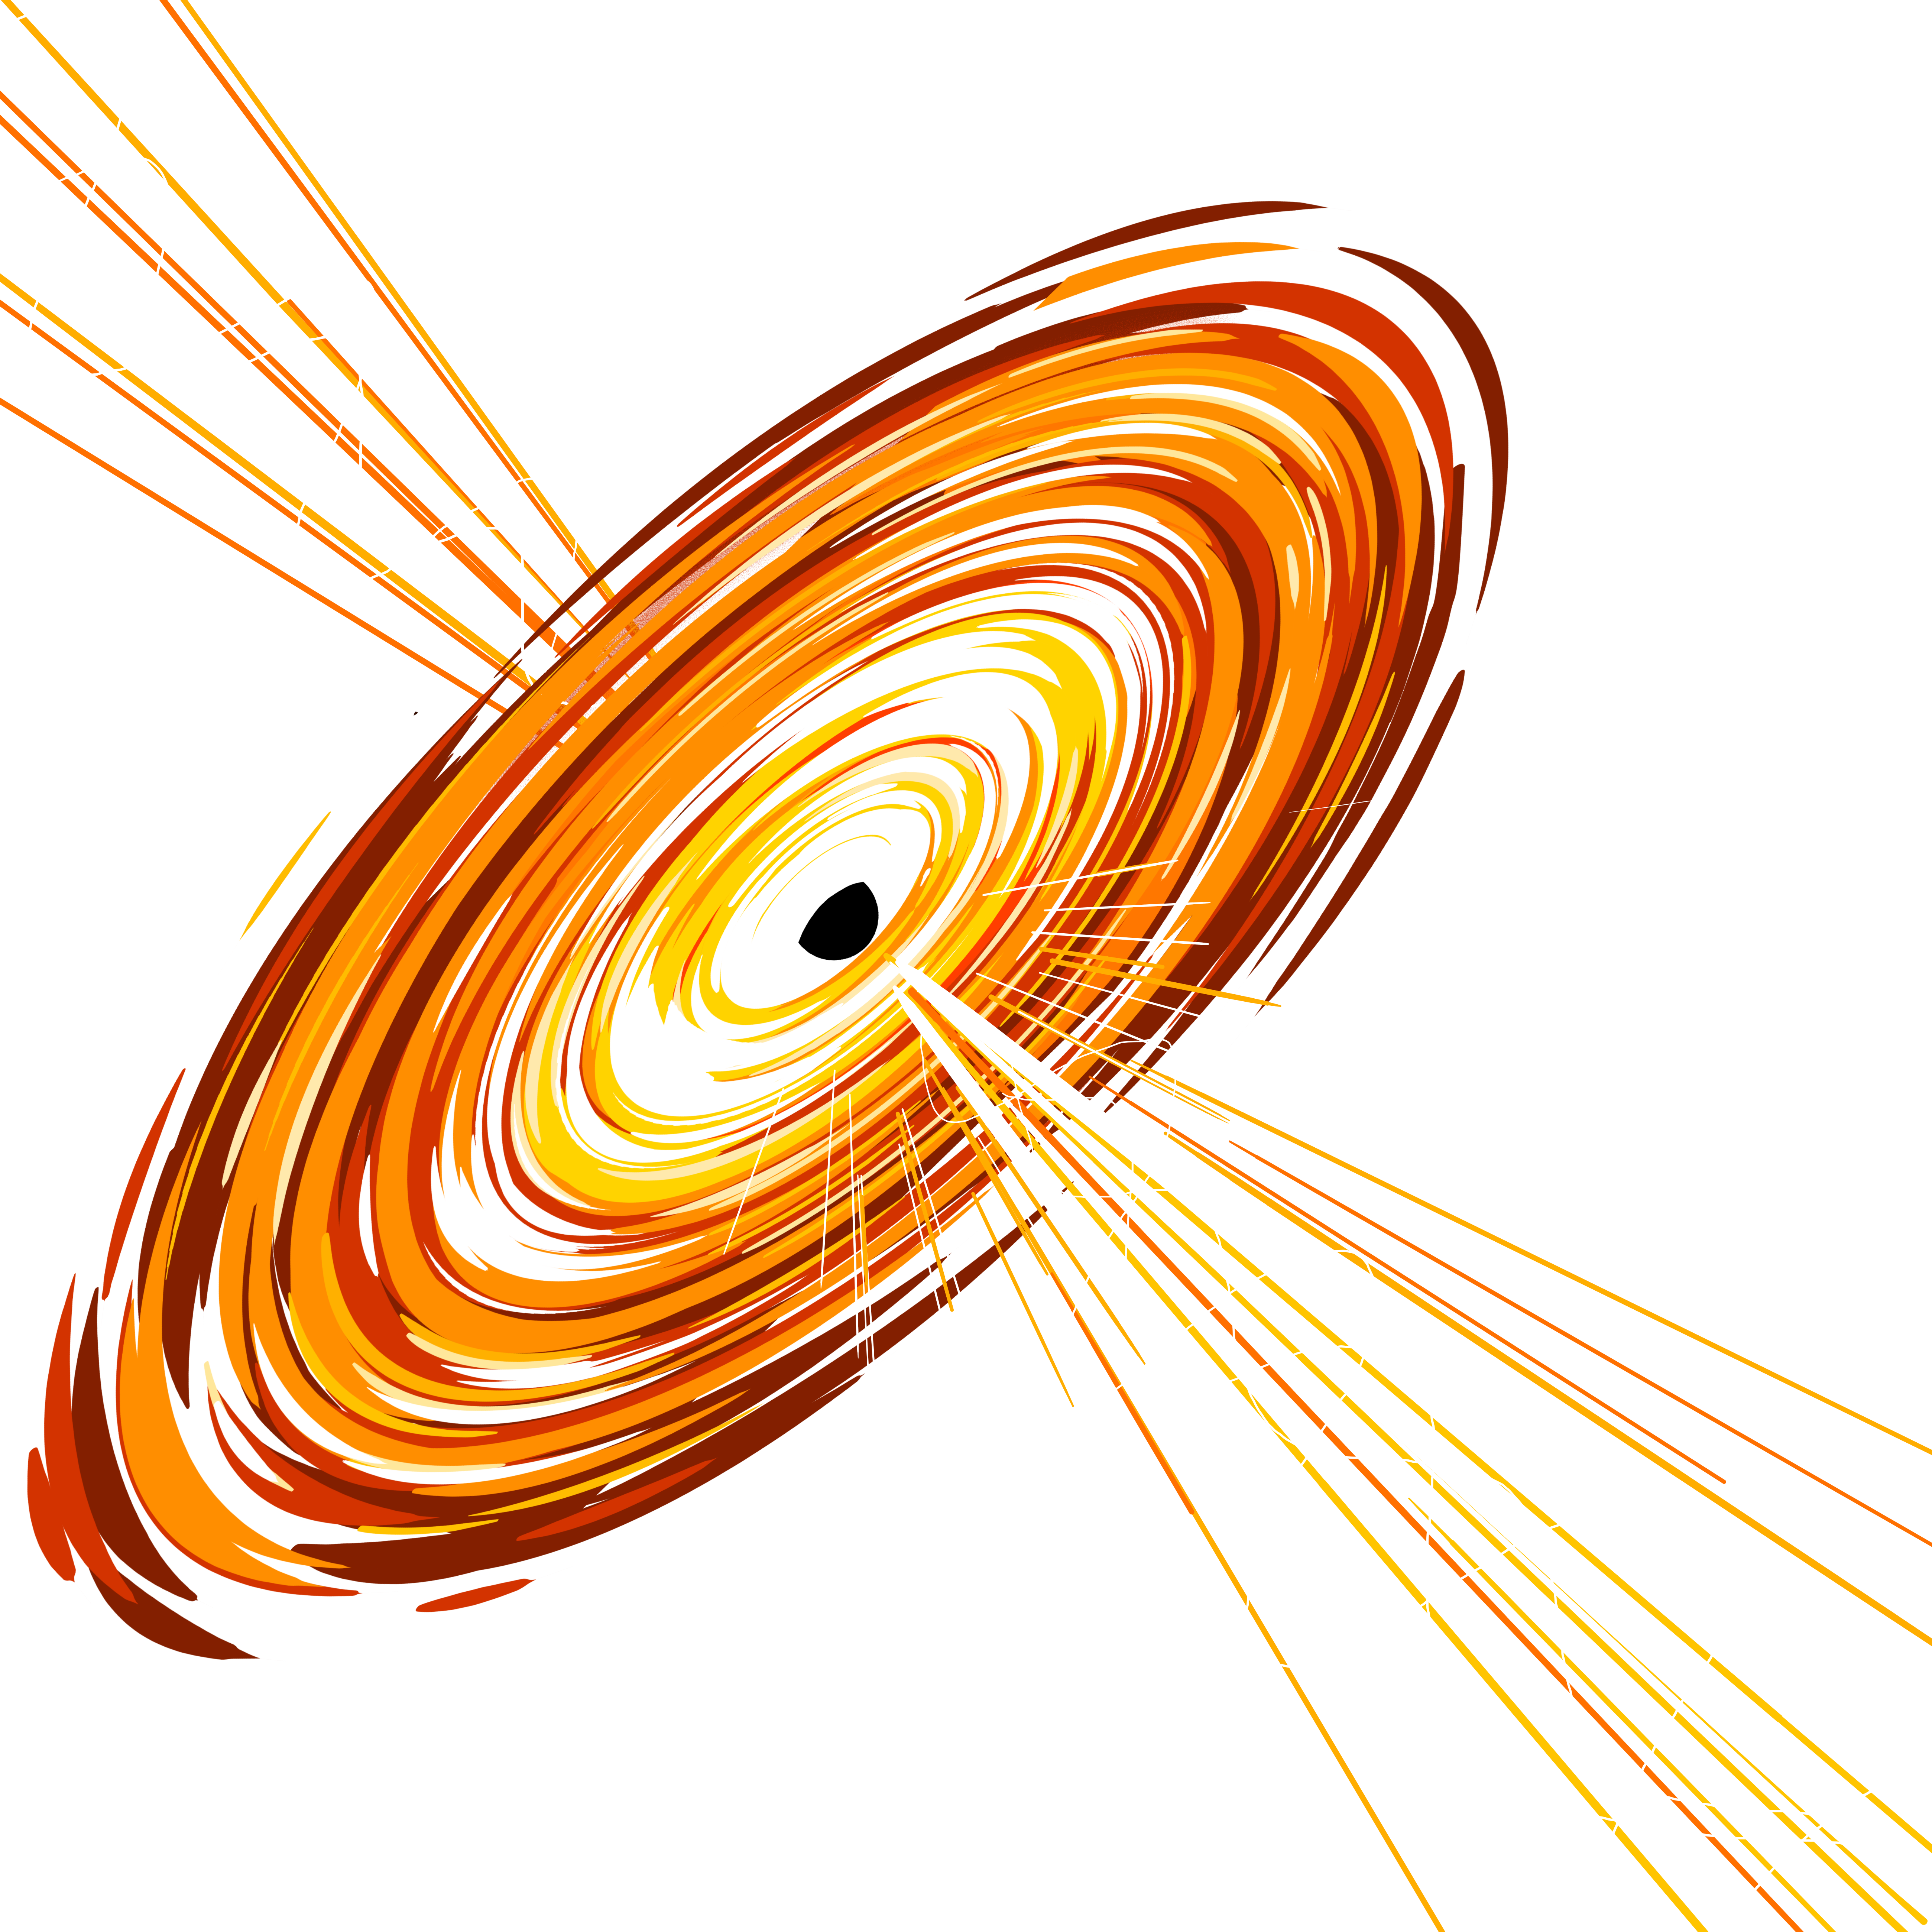 ID: A stylized painting of a black hole.